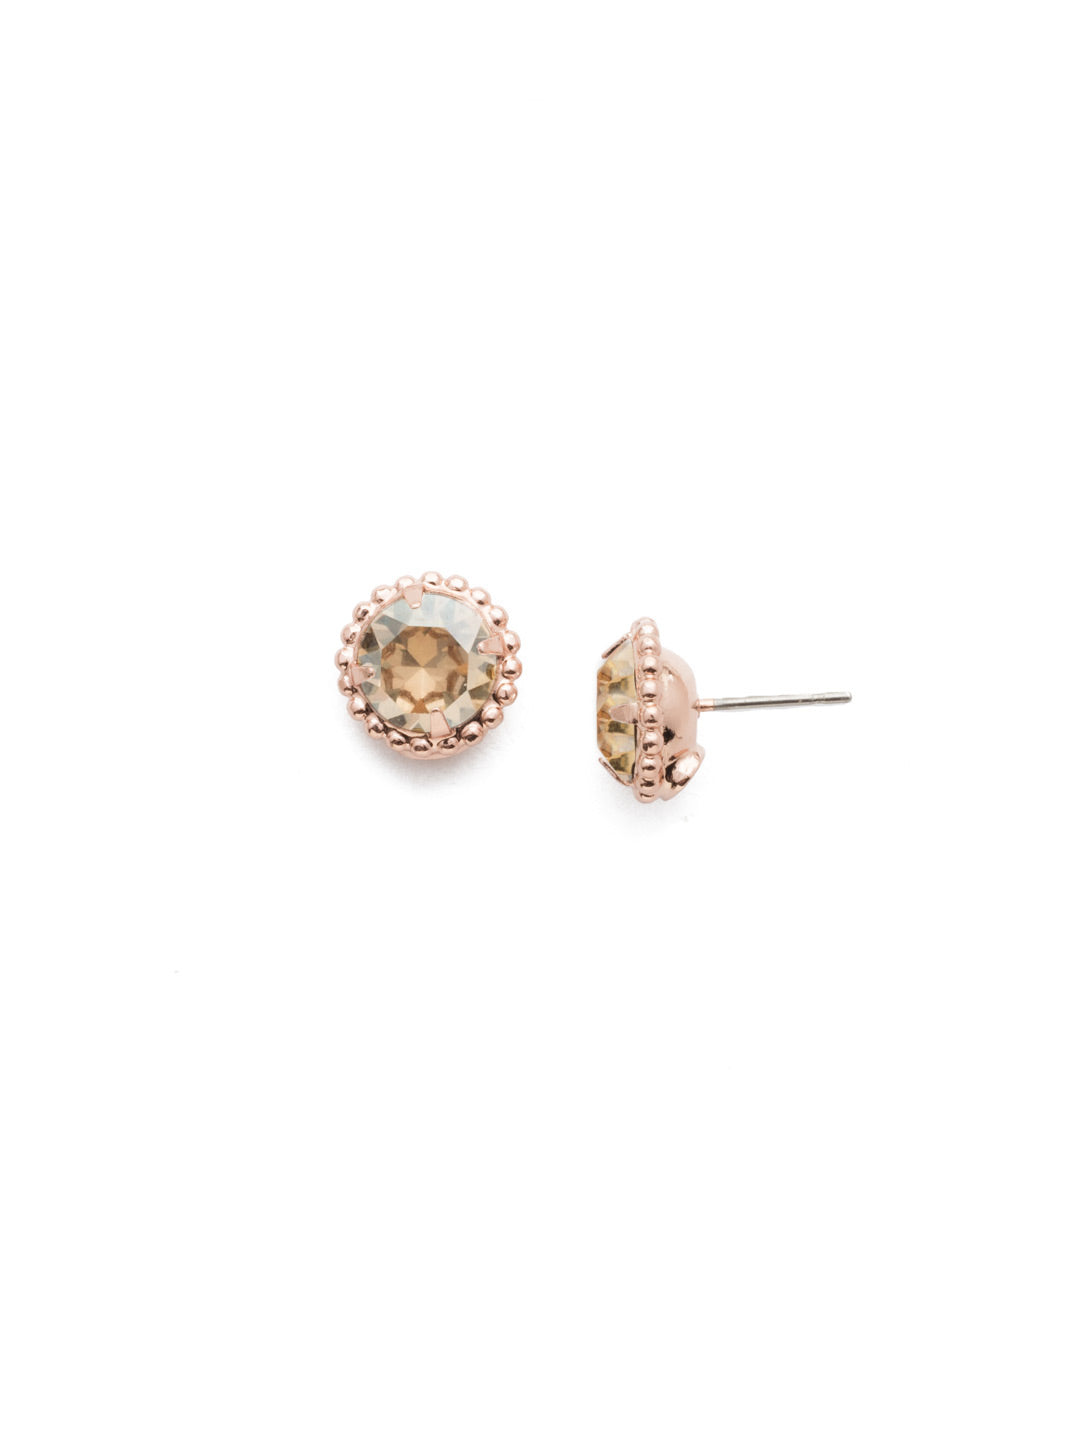 Simplicity Stud Earrings - EBY38RGDCH - <p>A timeless classic, the Simplicity Stud Earrings feature round cut crystals in a variety of colors; accented with a halo of metal beaded detail. Need help picking a stud? <a href="https://www.sorrelli.com/blogs/sisterhood/round-stud-earrings-101-a-rundown-of-sizes-styles-and-sparkle">Check out our size guide!</a> From Sorrelli's Dark Champagne collection in our Rose Gold-tone finish.</p>